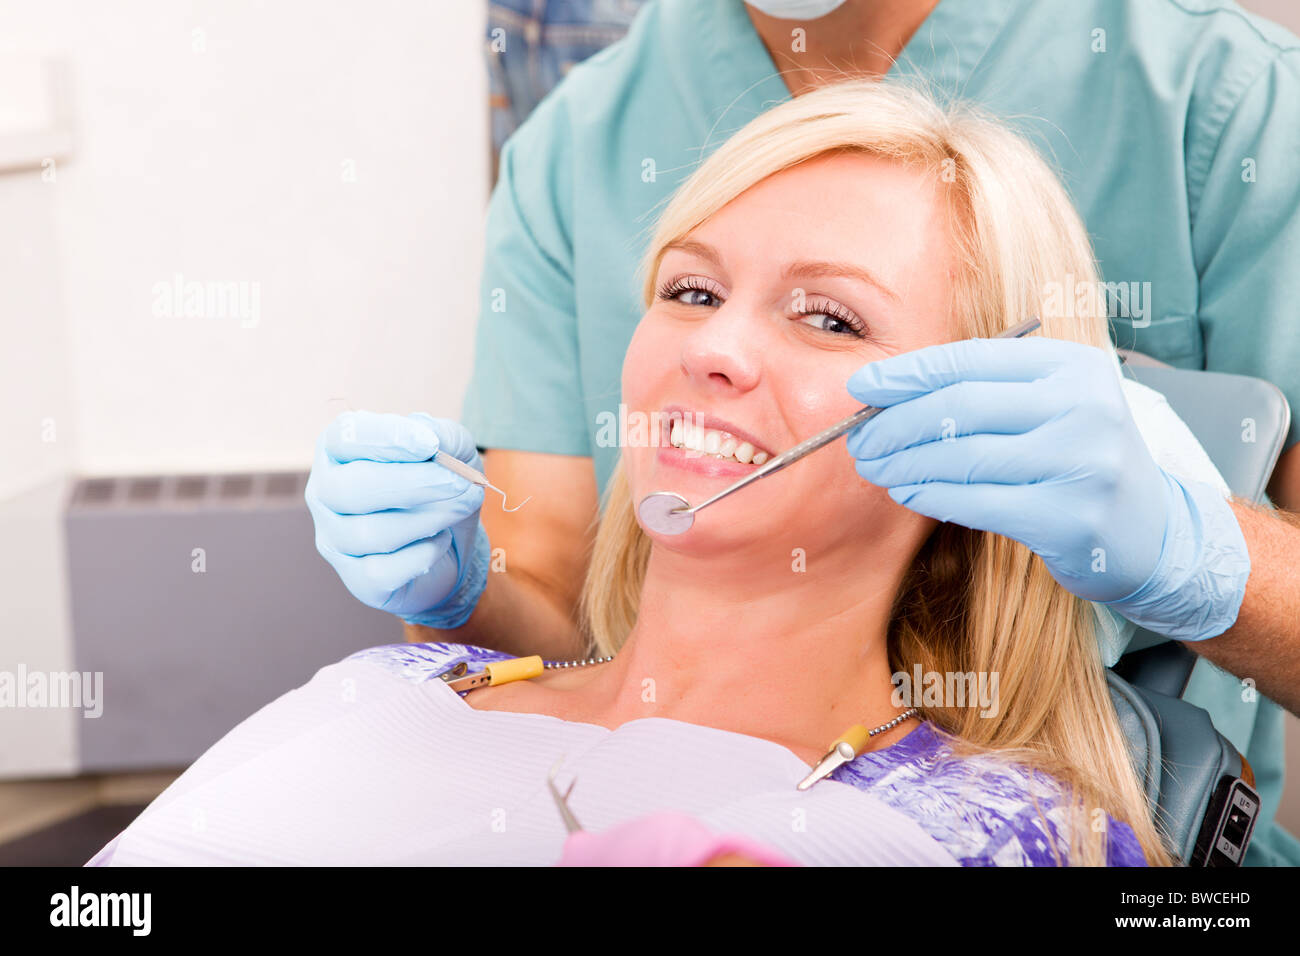 A smiling woman at the dentist ready for a check-up Stock Photo